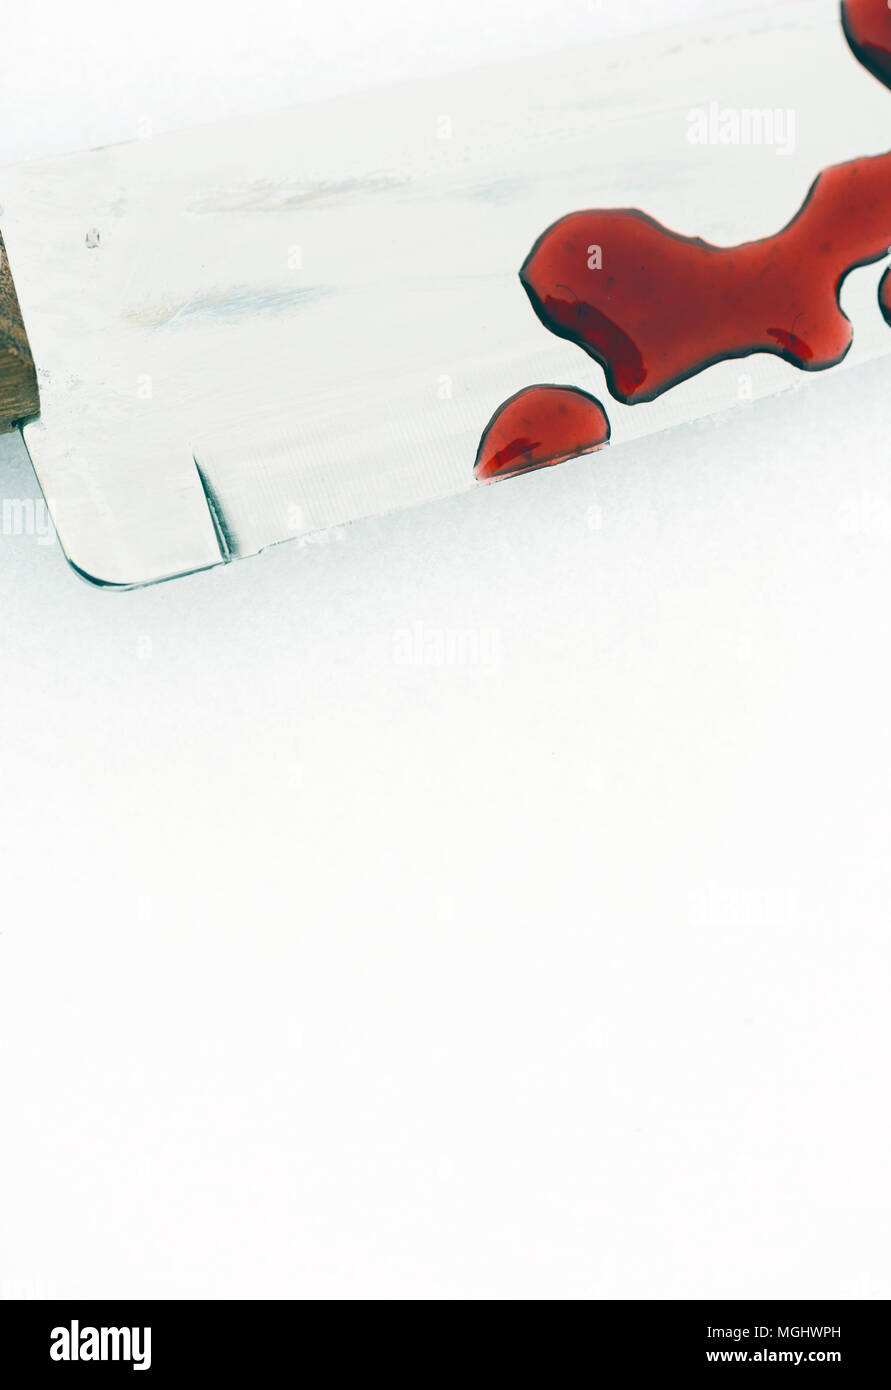 Sharp metal kitchen knife edge used as a violent murder weapon with blood drops on a white snow background. Blade covered in violence with copy space  Stock Photo